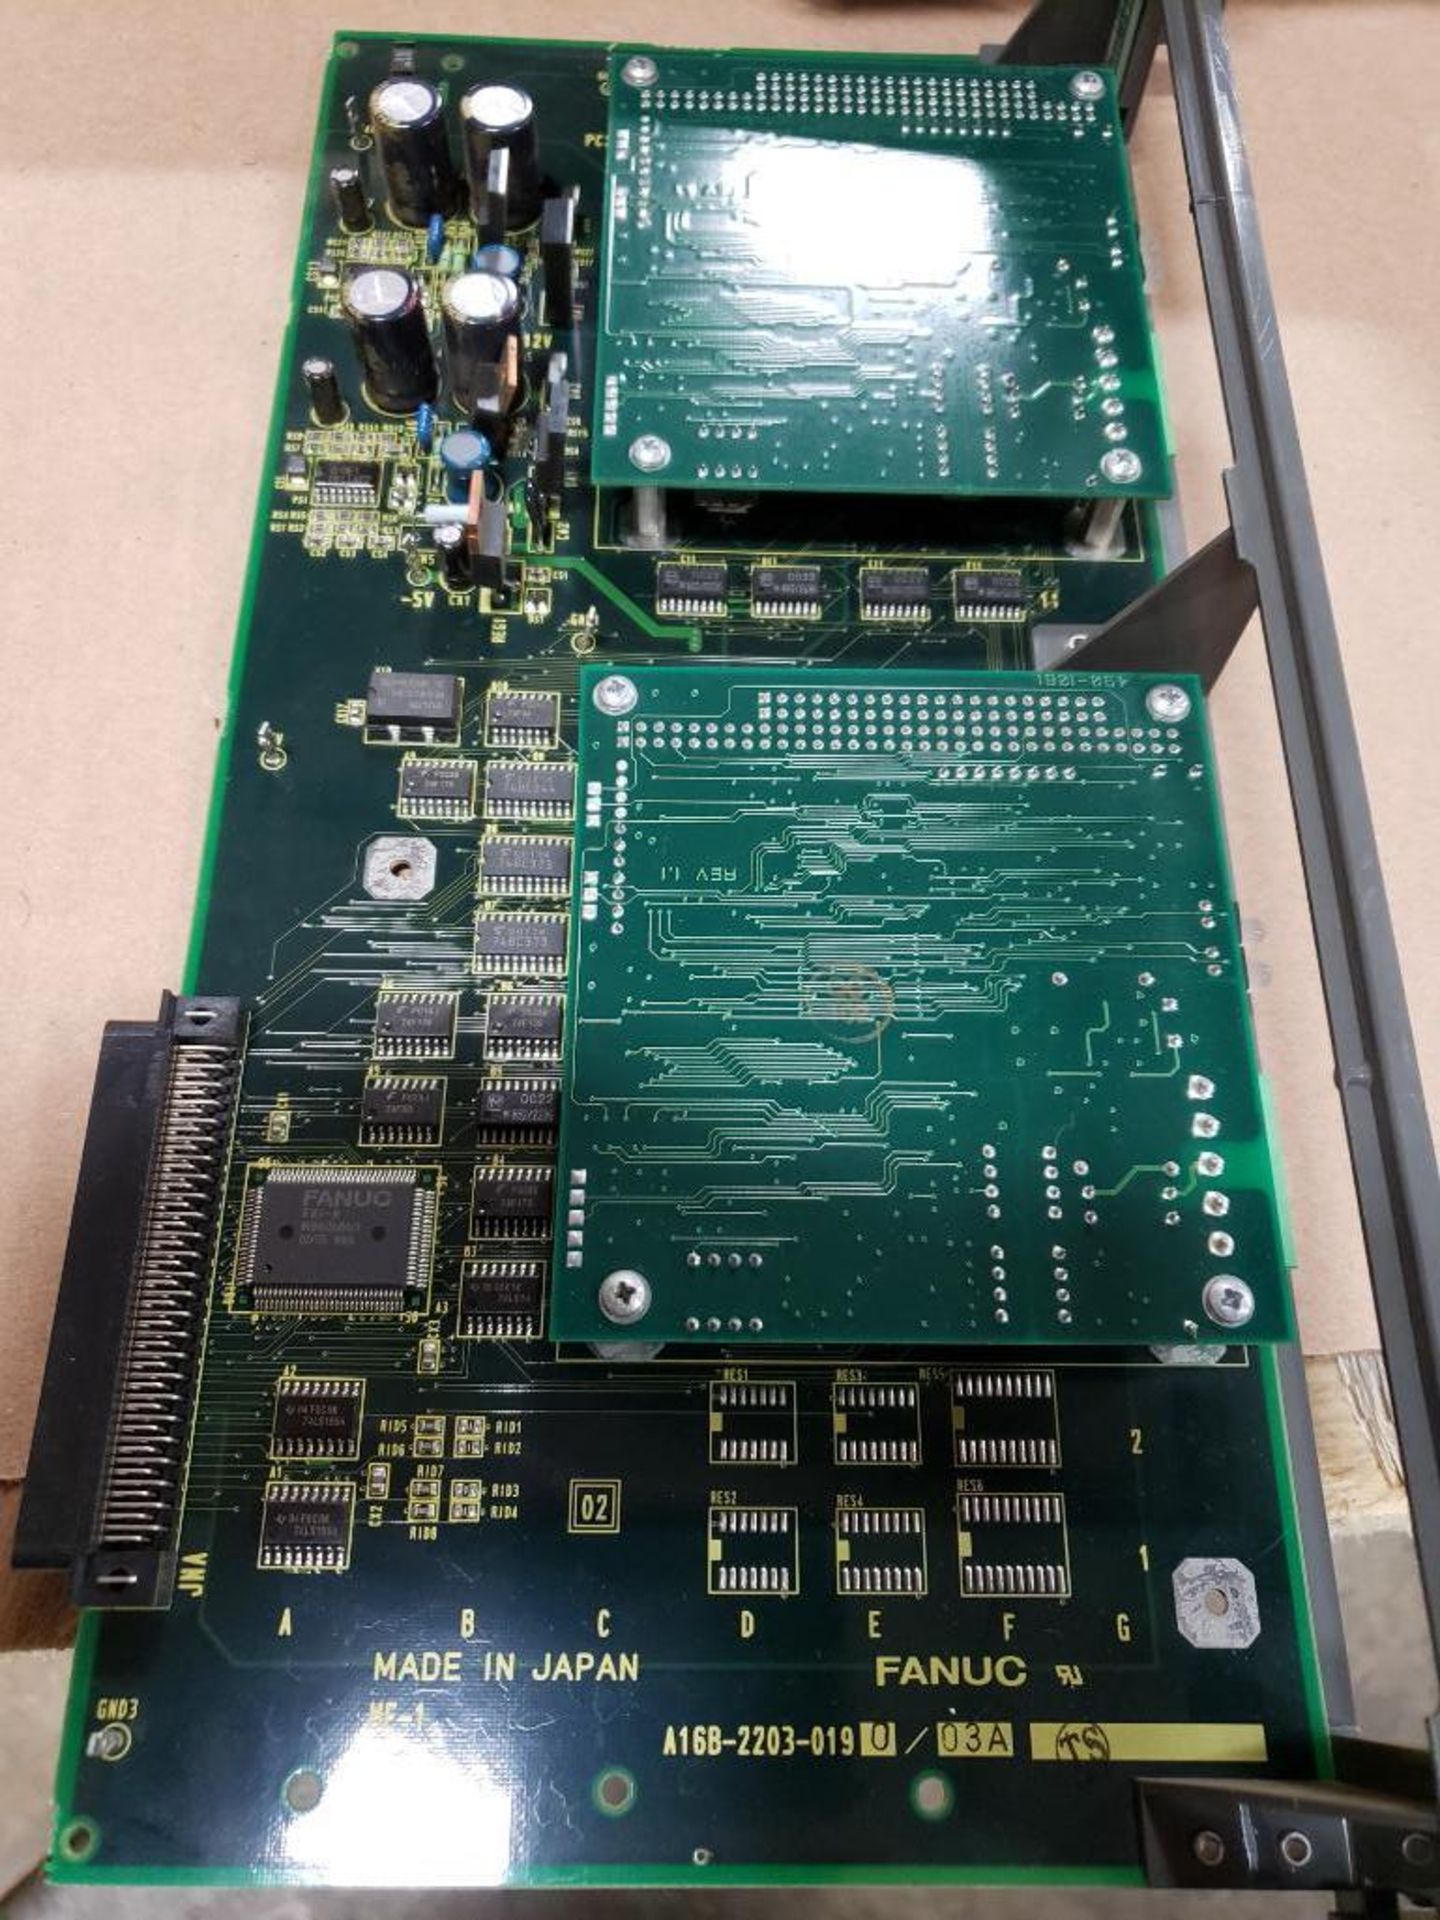 Qty 3 - Fanuc control board. Part number A16B-2203-0190/03A. - Image 6 of 6